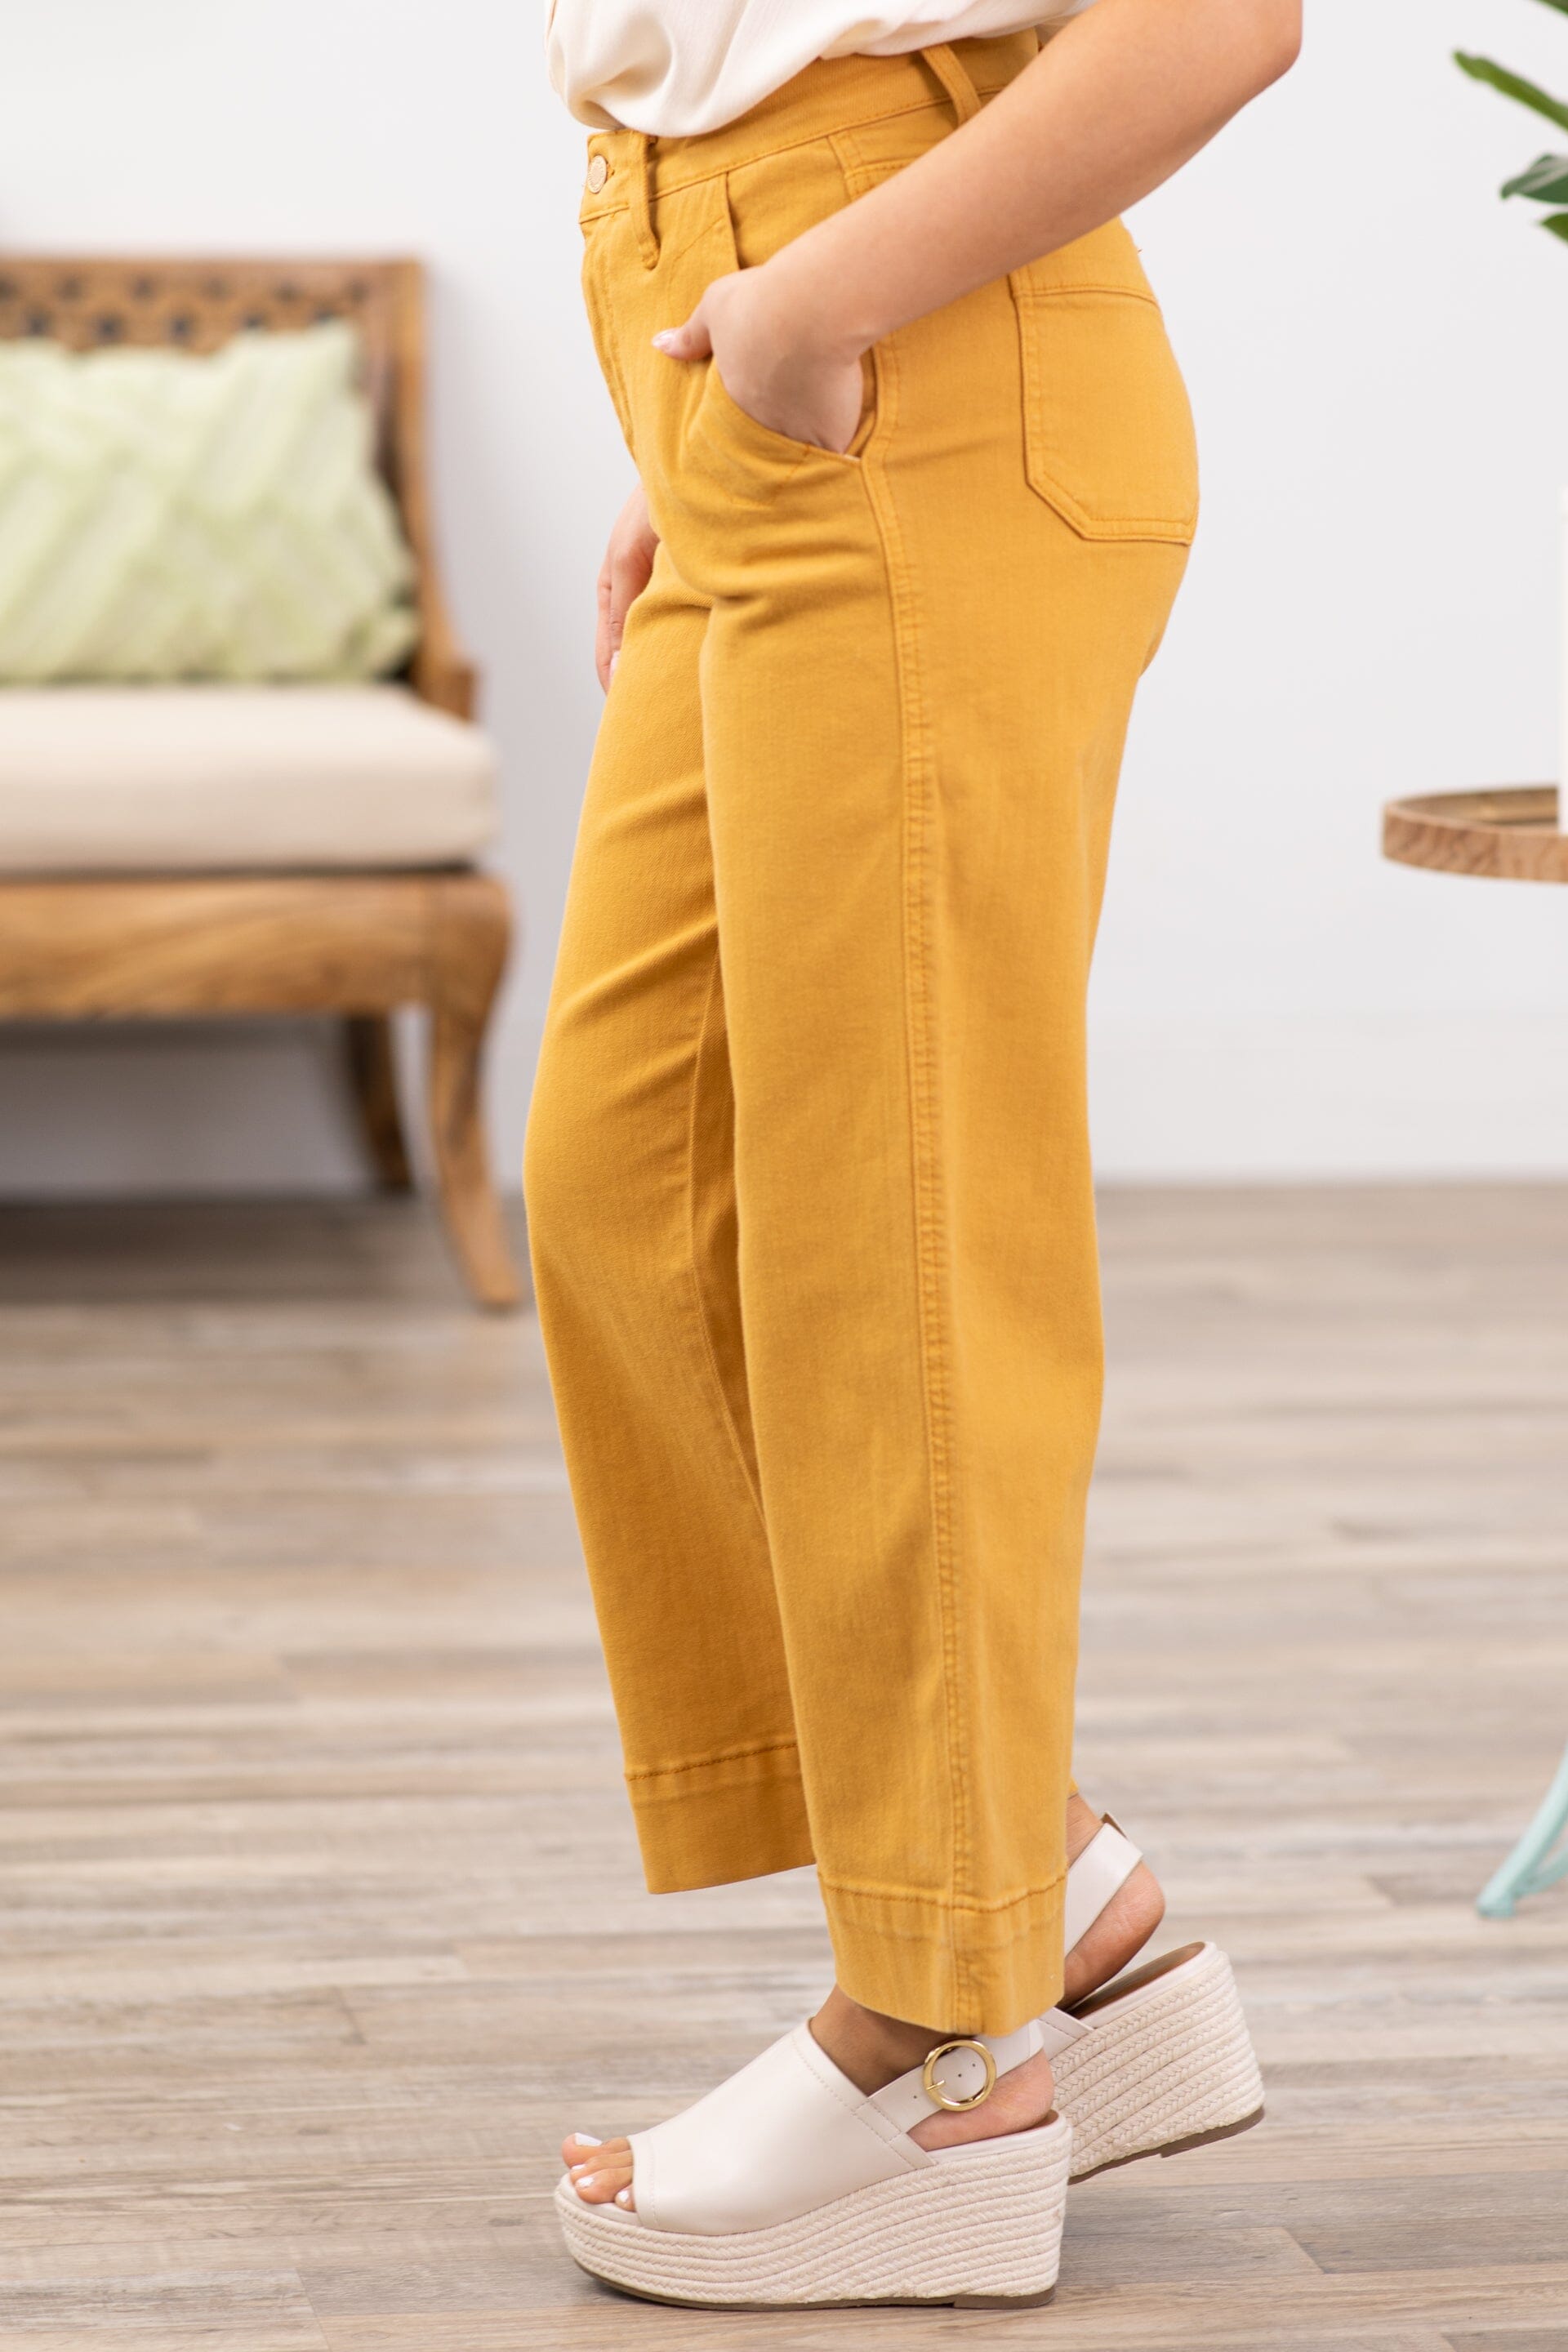 Judy Blue Mustard Cropped Wide Leg Pants - Filly Flair